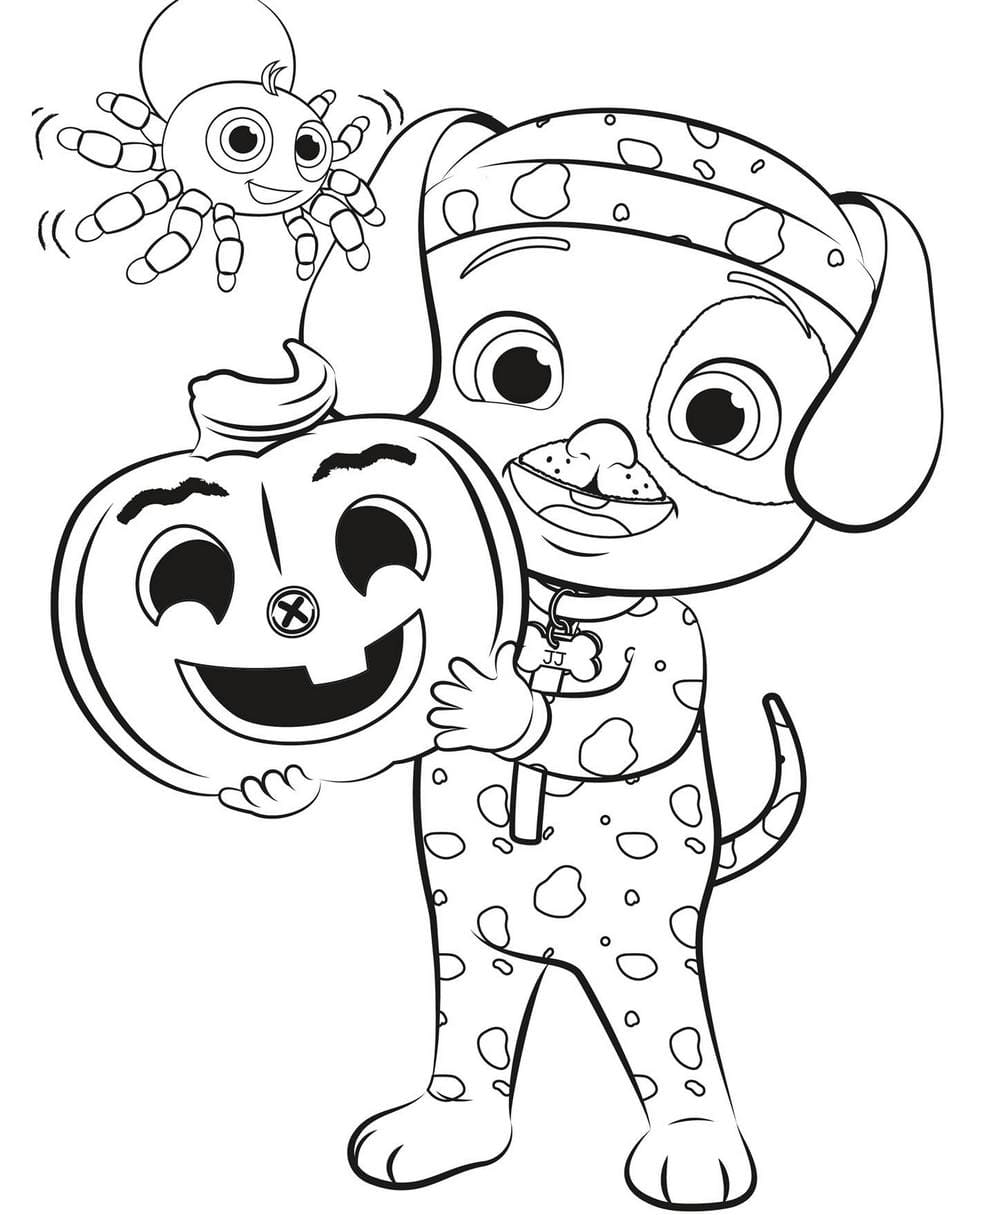 cocomelon-coloring-pages-50-coloring-pages-wonder-day-coloring-pages-for-children-and-adults